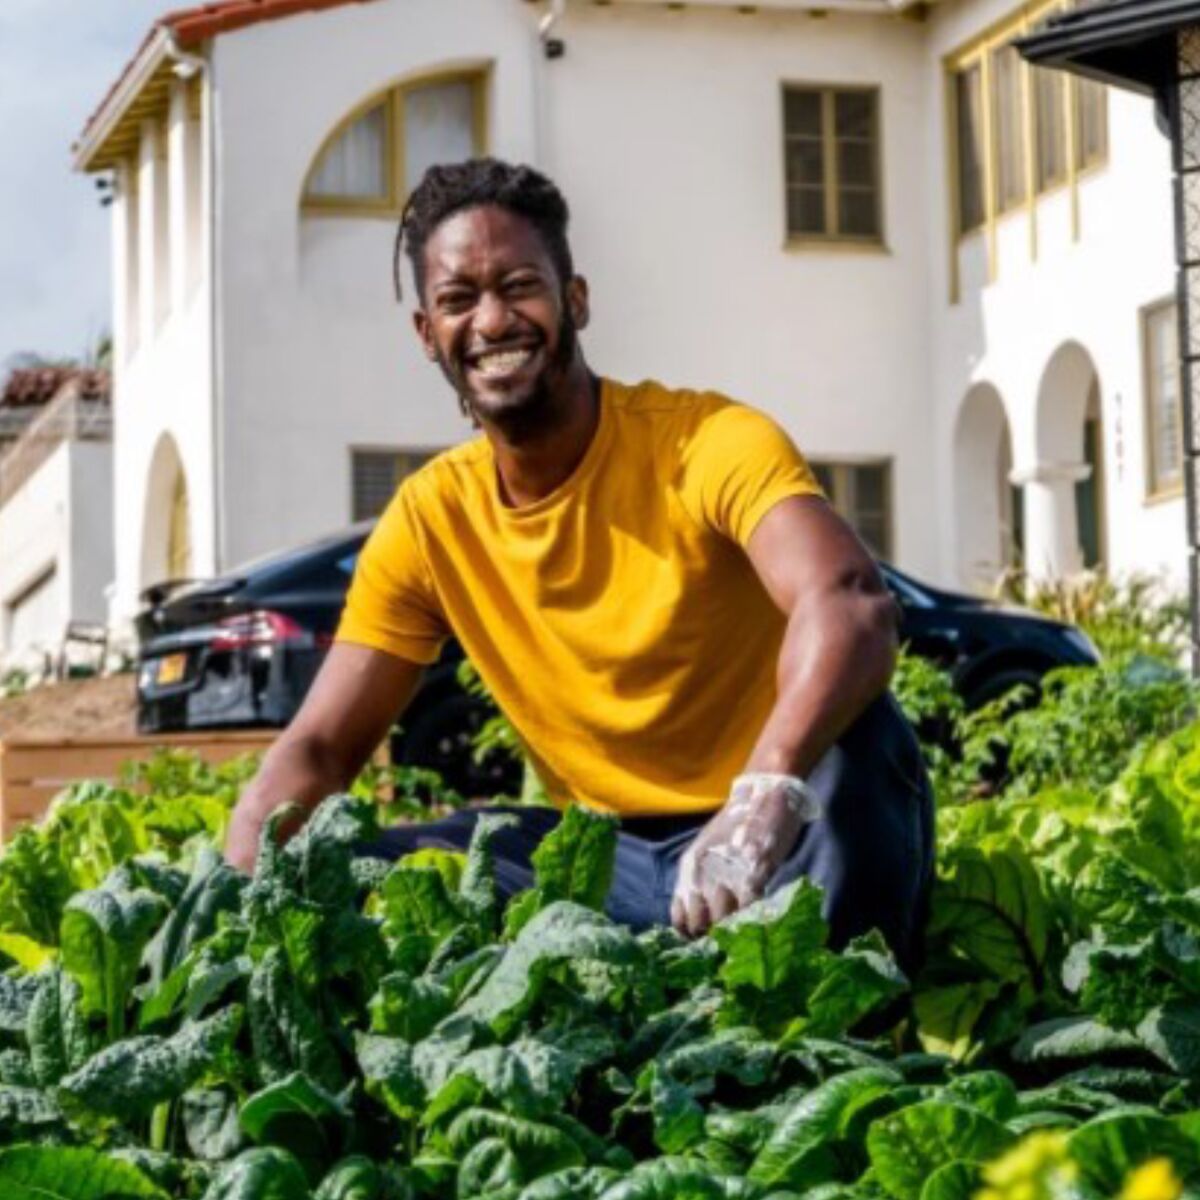 Jamiah Hargins crouches in a bed of greens in front of a house.